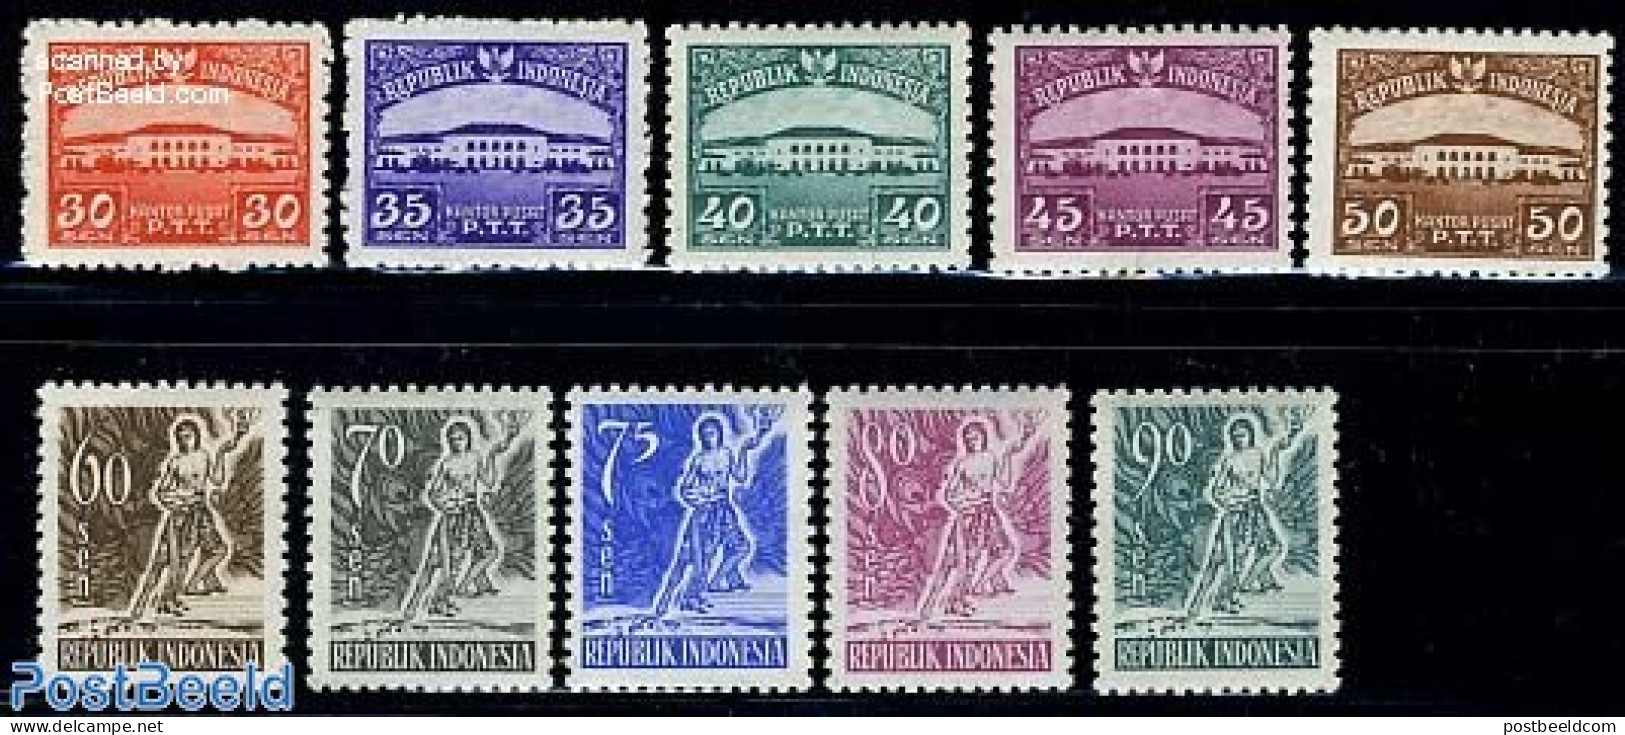 Indonesia 1953 Definitives 10v, Mint NH - Indonesia